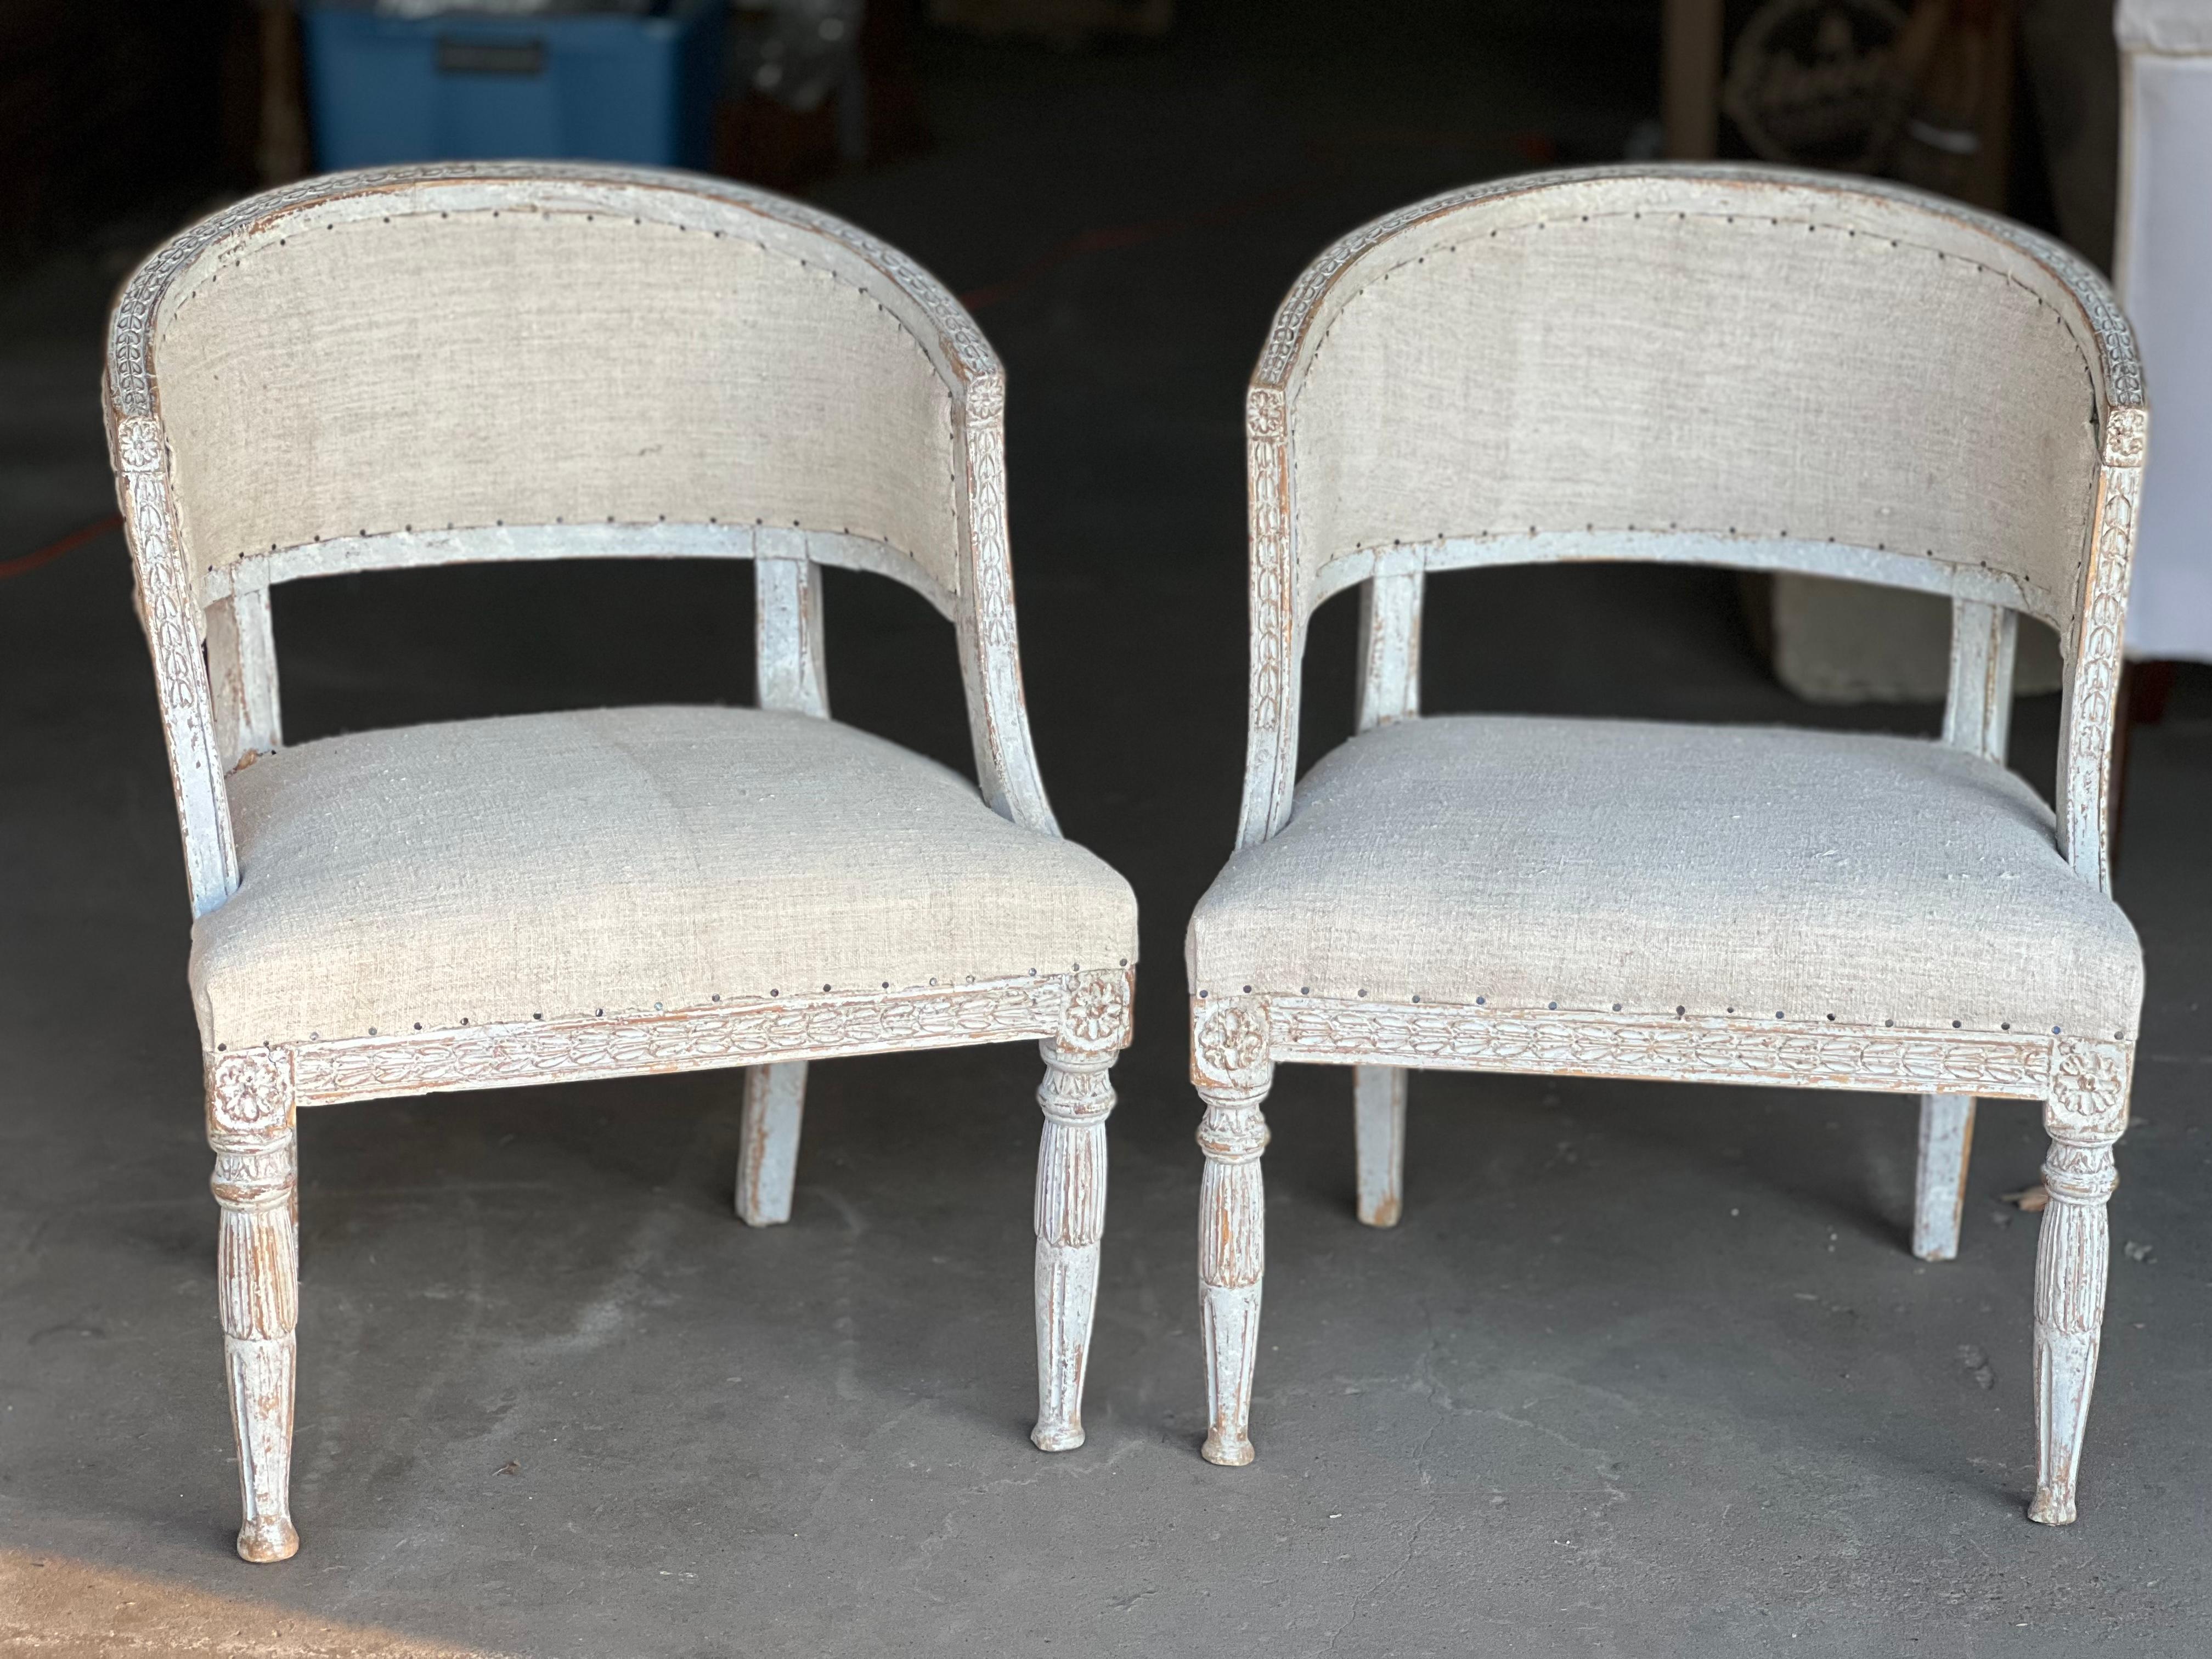 A gorgeous and unique pair of late 18th Century Swedish barrel backs from the Gustavian period that have been dry scrapped and then had a recent paint touch up with grays and white hues to the wooden details. Fine details include: rosette carvings